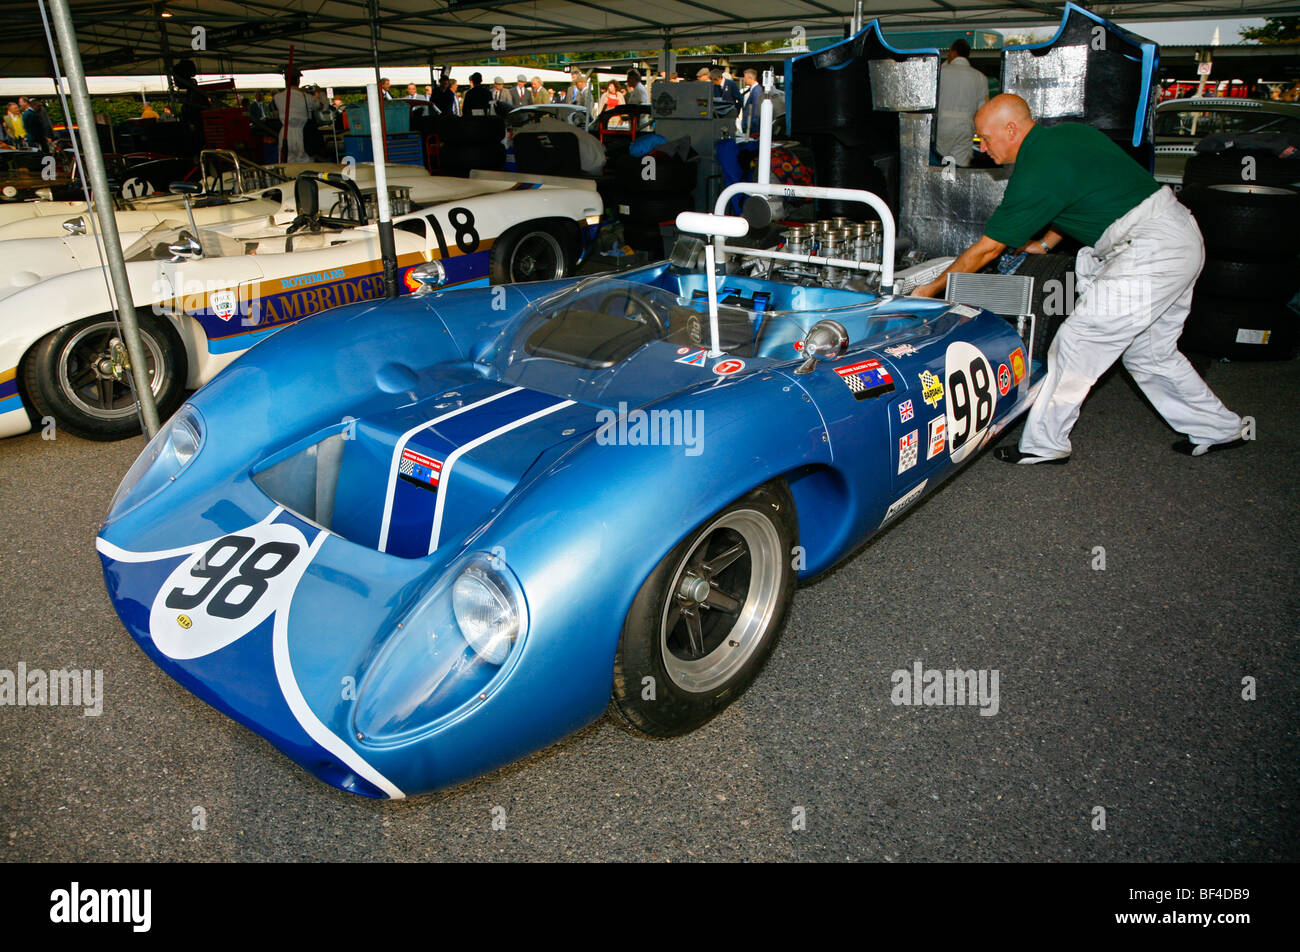 1965 Lola-Chevrolet T70 Spyder being prepared in the paddock at the 2009 Goodwood Revival, Sussex, UK. Stock Photo